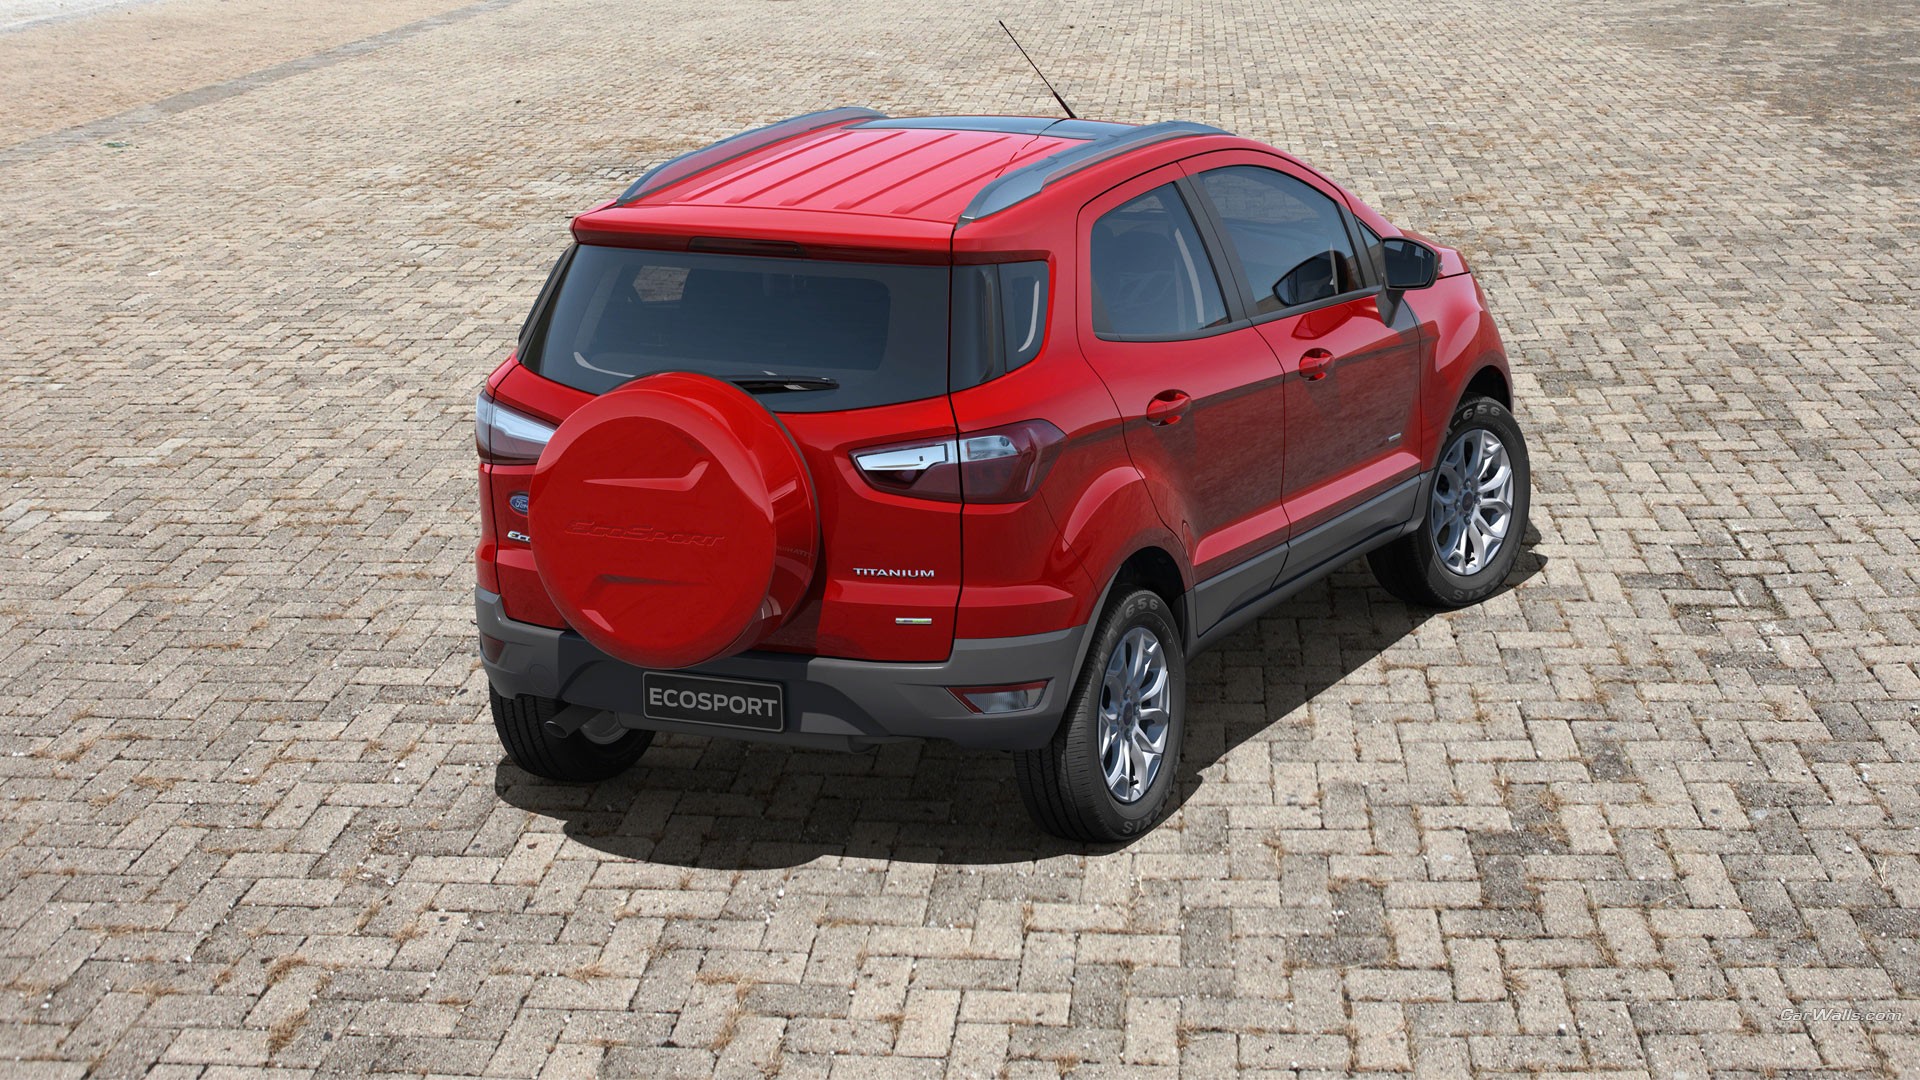 General 1920x1080 Ford EcoSport Ford vehicle car red cars SUV Brazilian cars